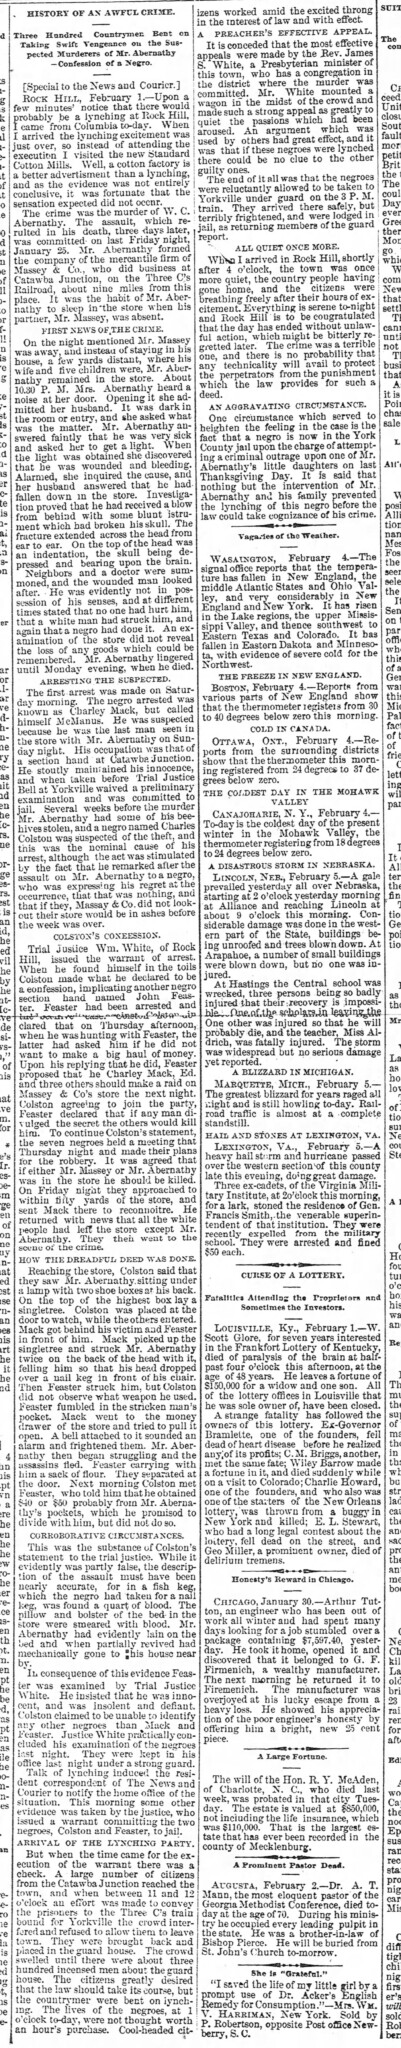 The Hewberry Herald and News - Feb. 7, 1889